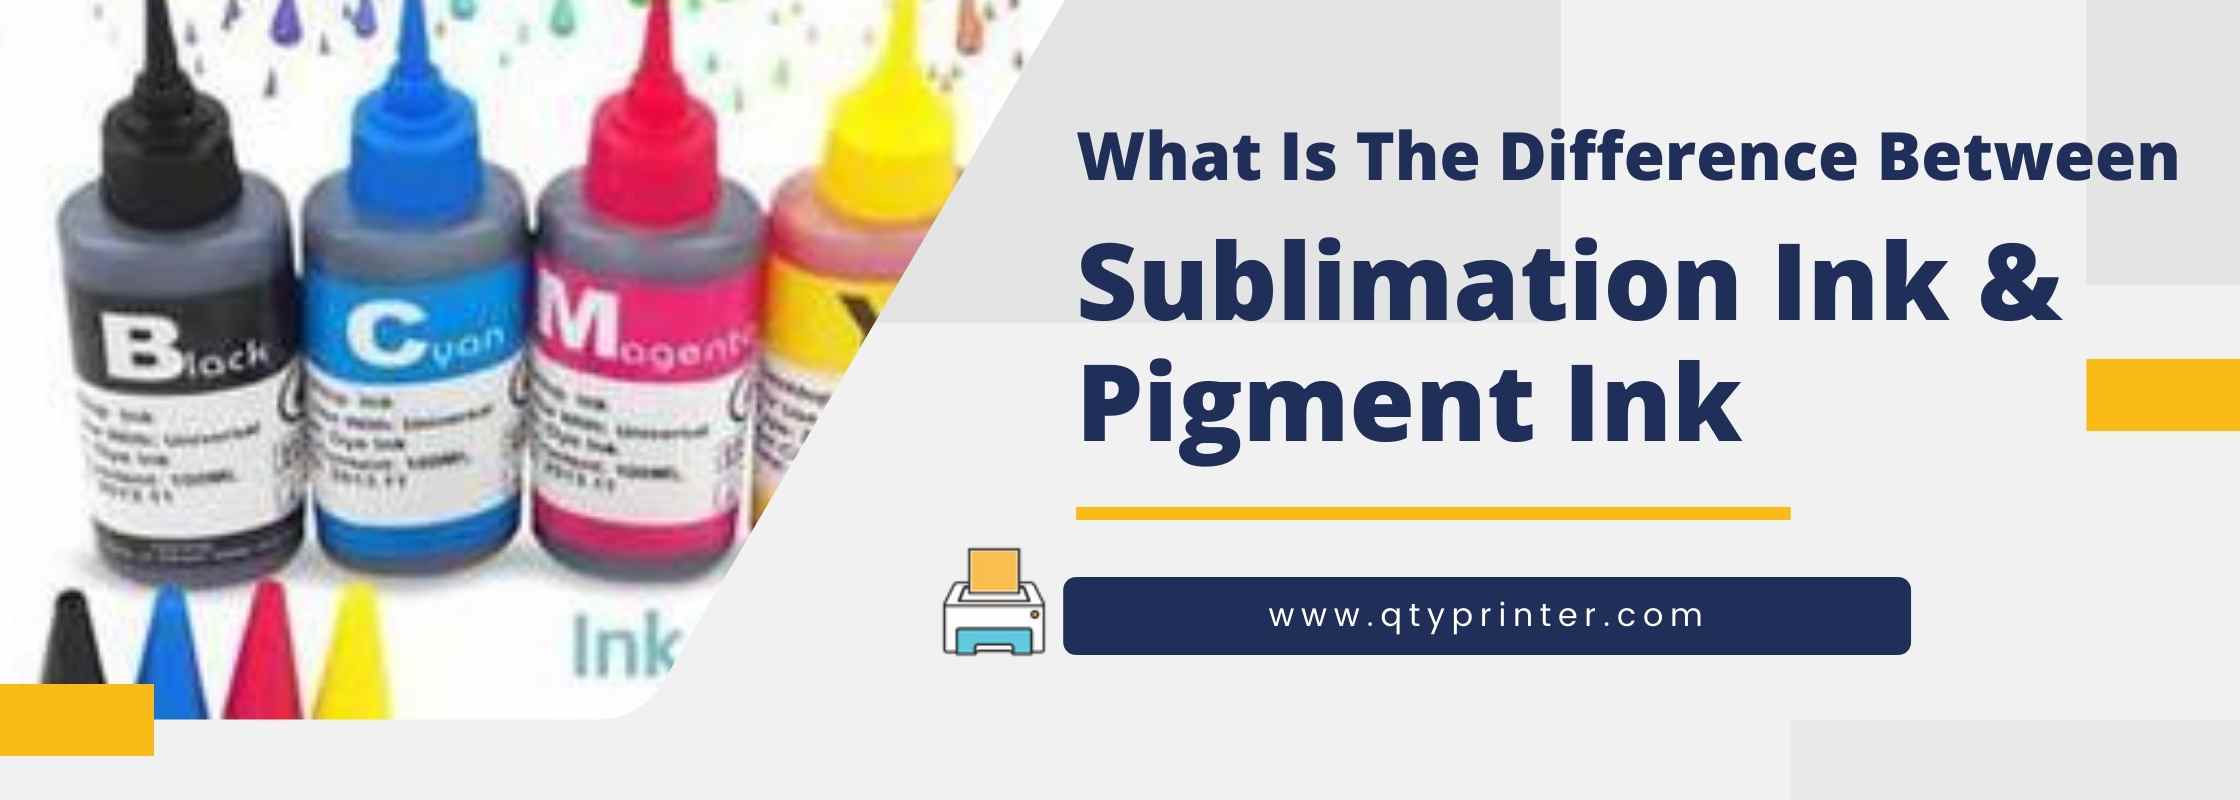 What is The Difference Between Sublimation Ink and Pigment Ink